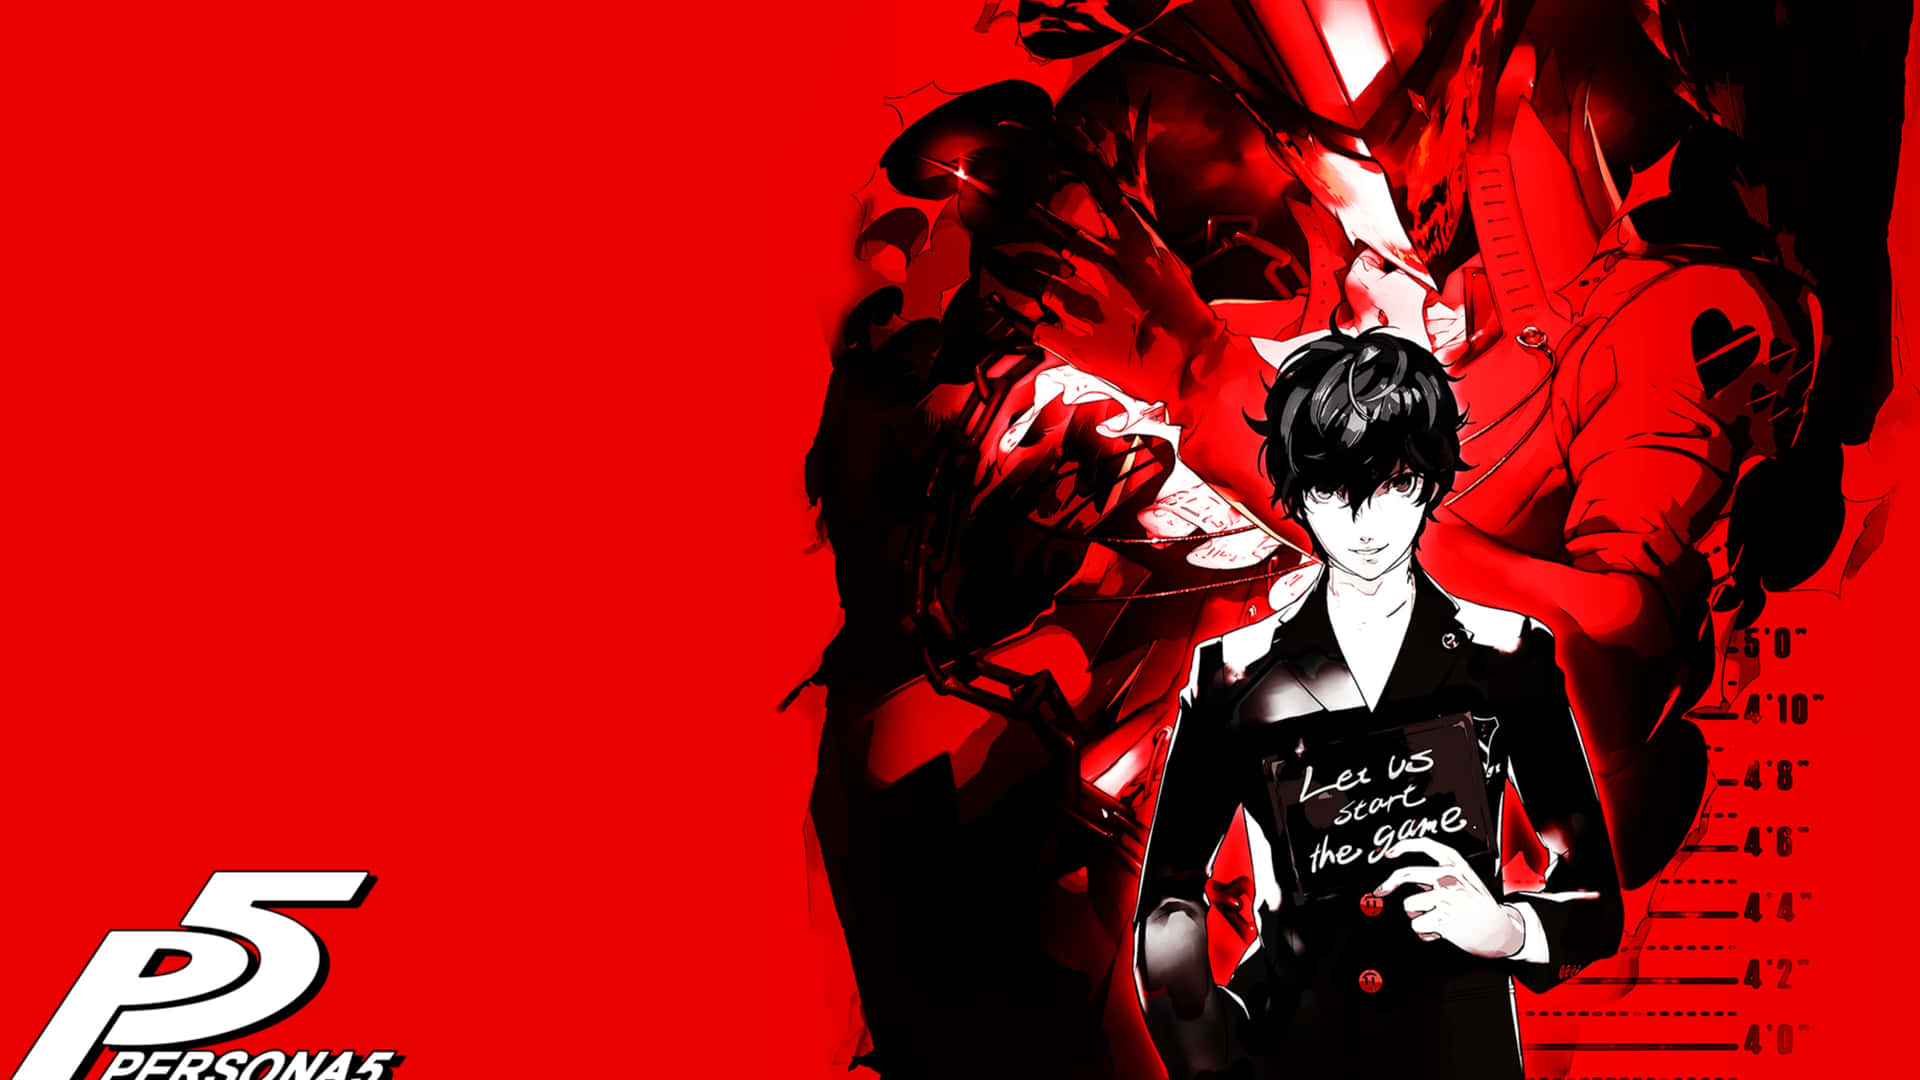 Spellbinding Persona 5 Wallpaper with Protagonists in Action